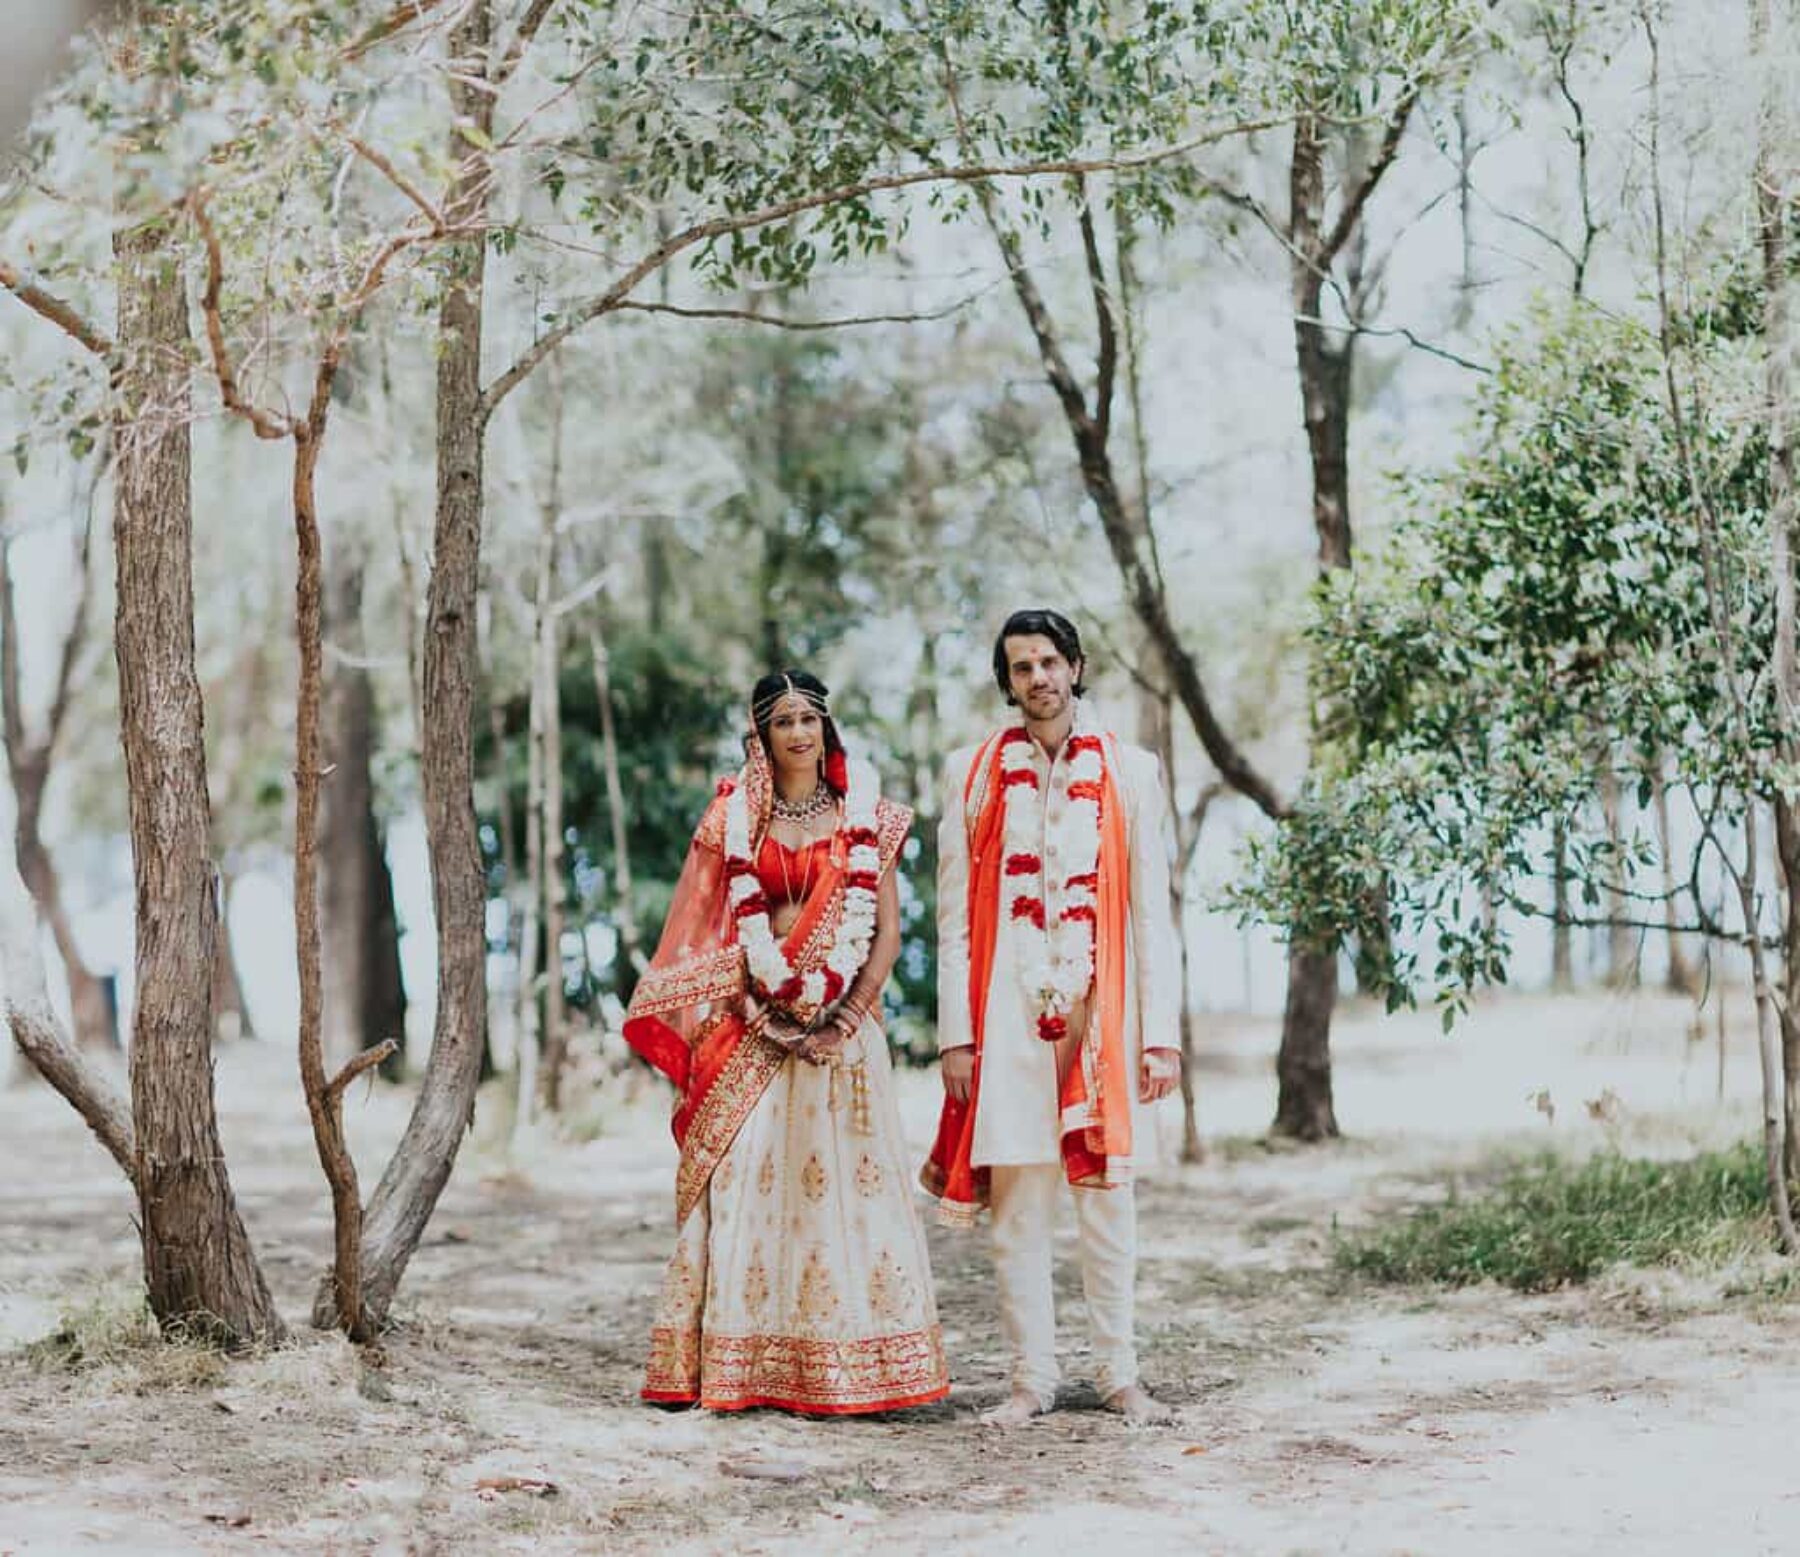 Hindu bride and groom in vibrant red and gold wedding attire - Nina Claire Photography